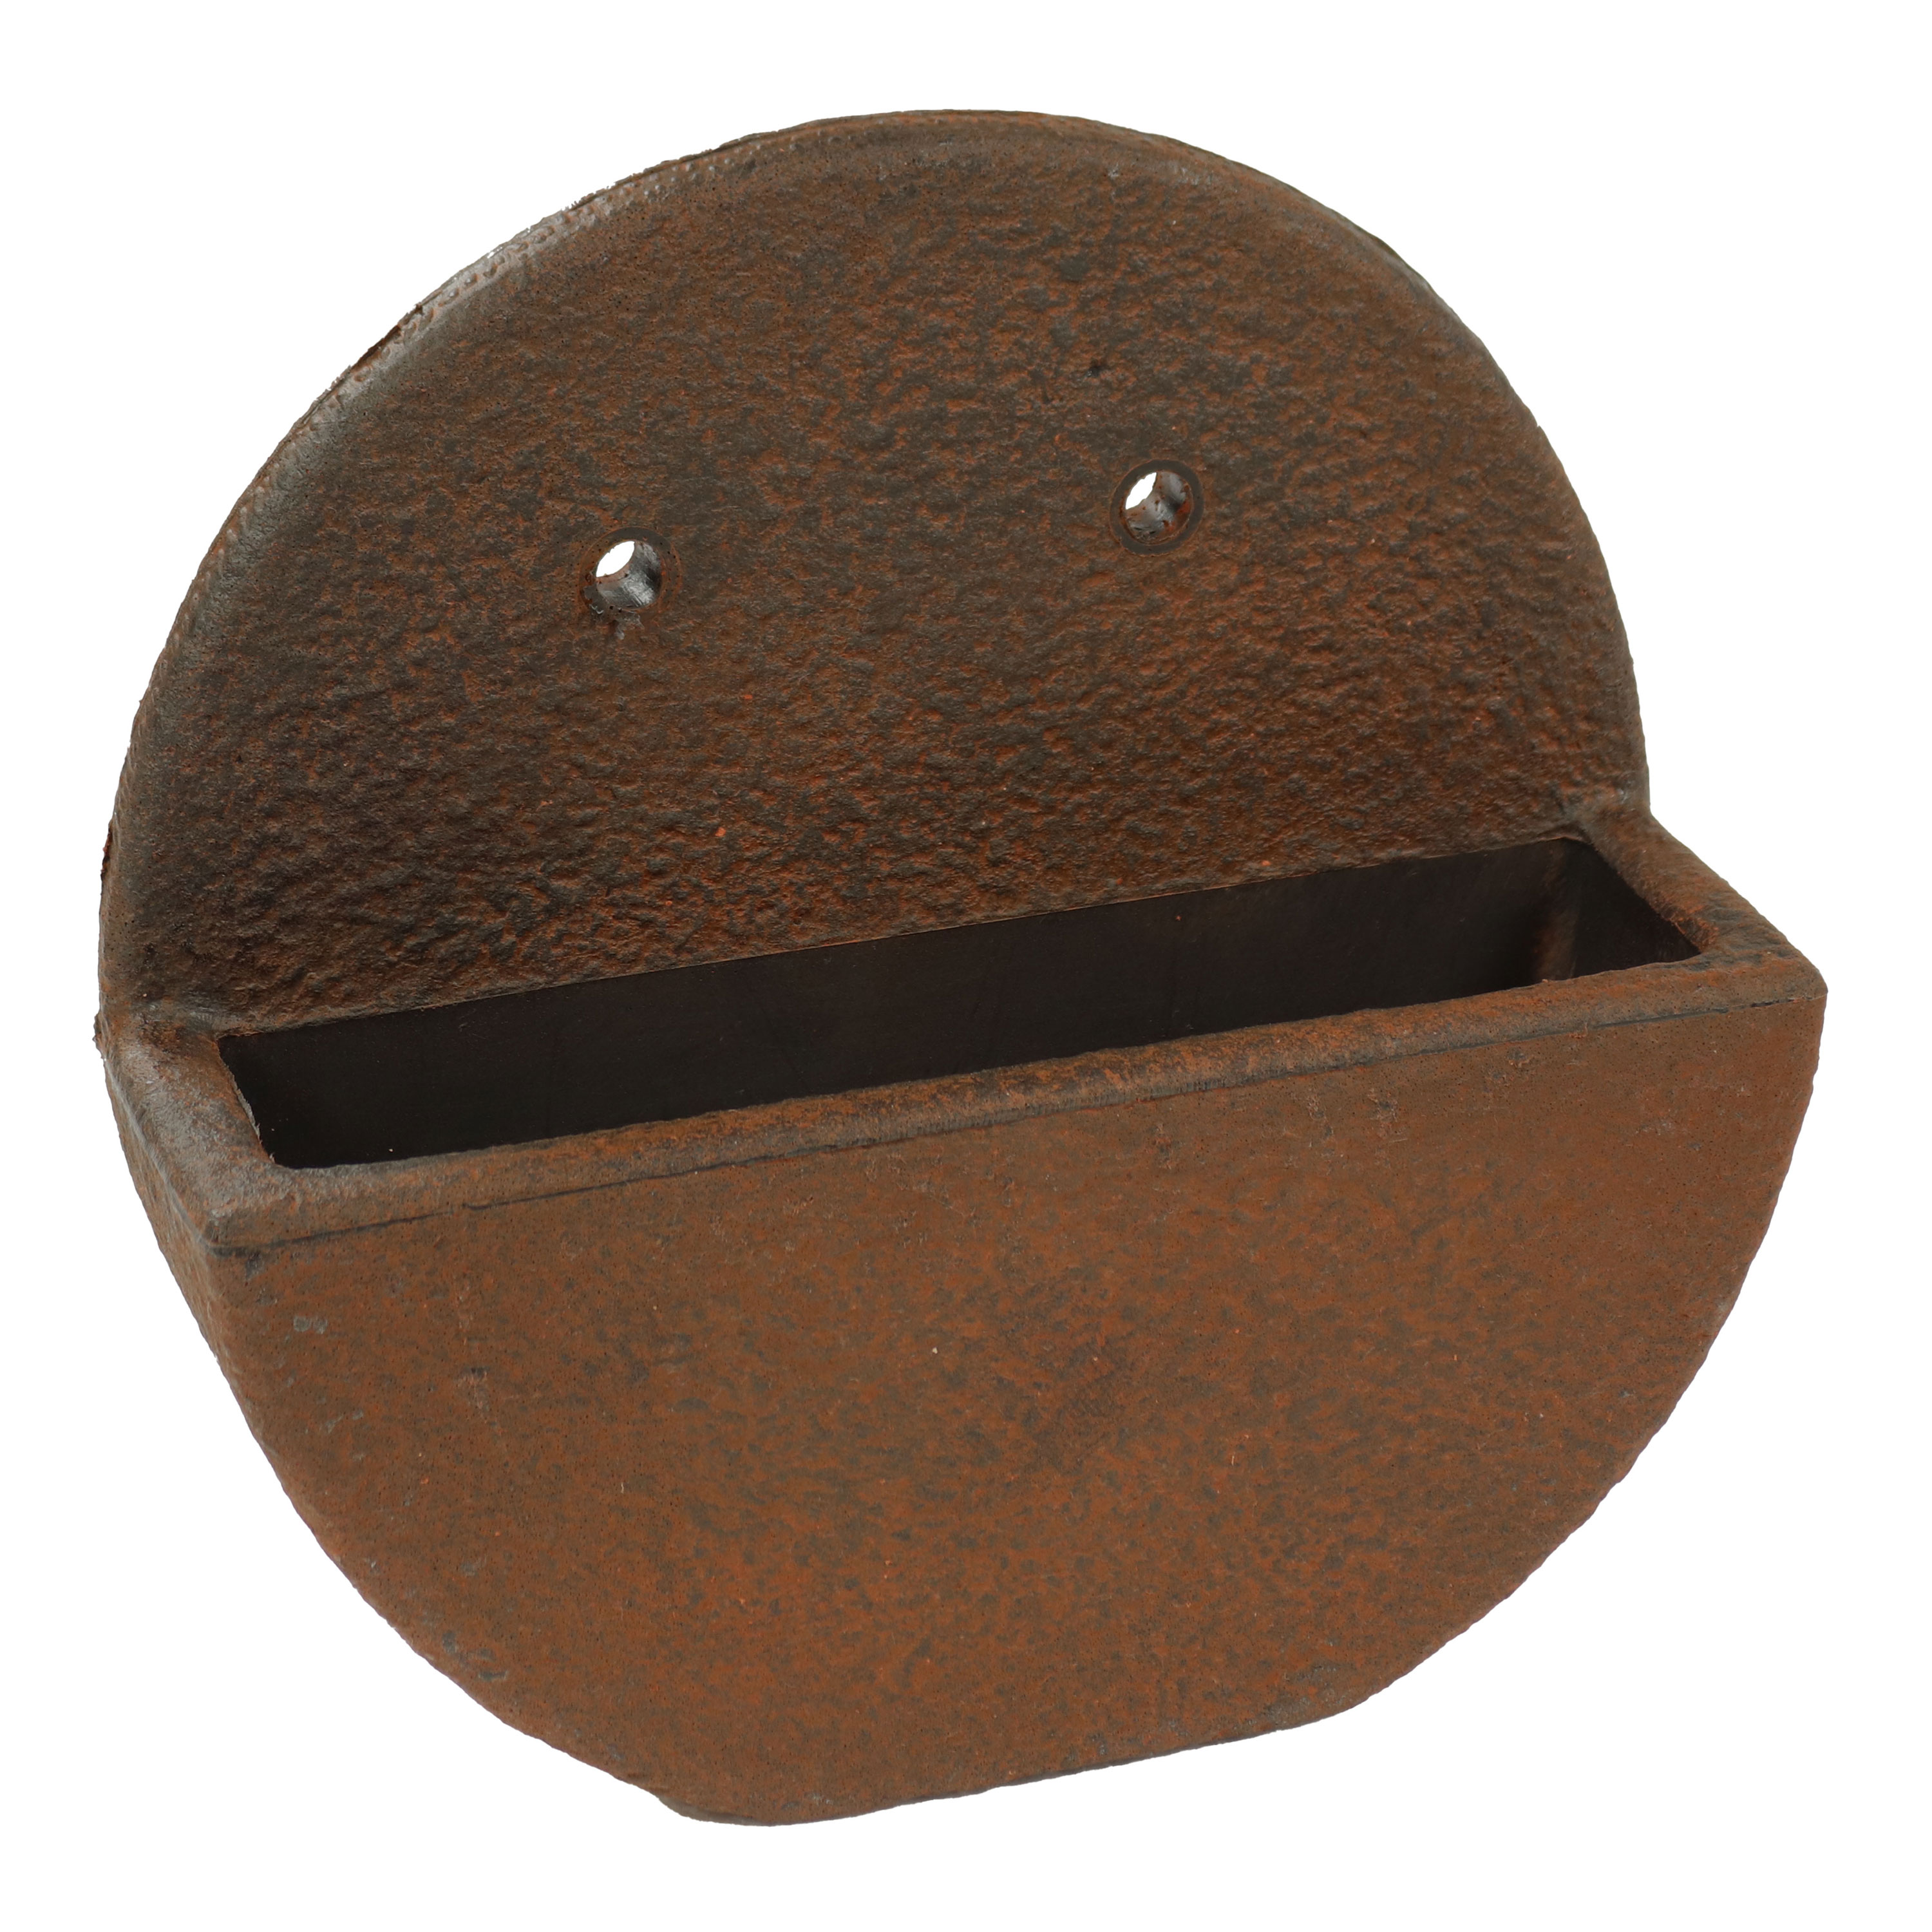 12 in Round Wall-Mounted Outdoor Planter - Dark Brown